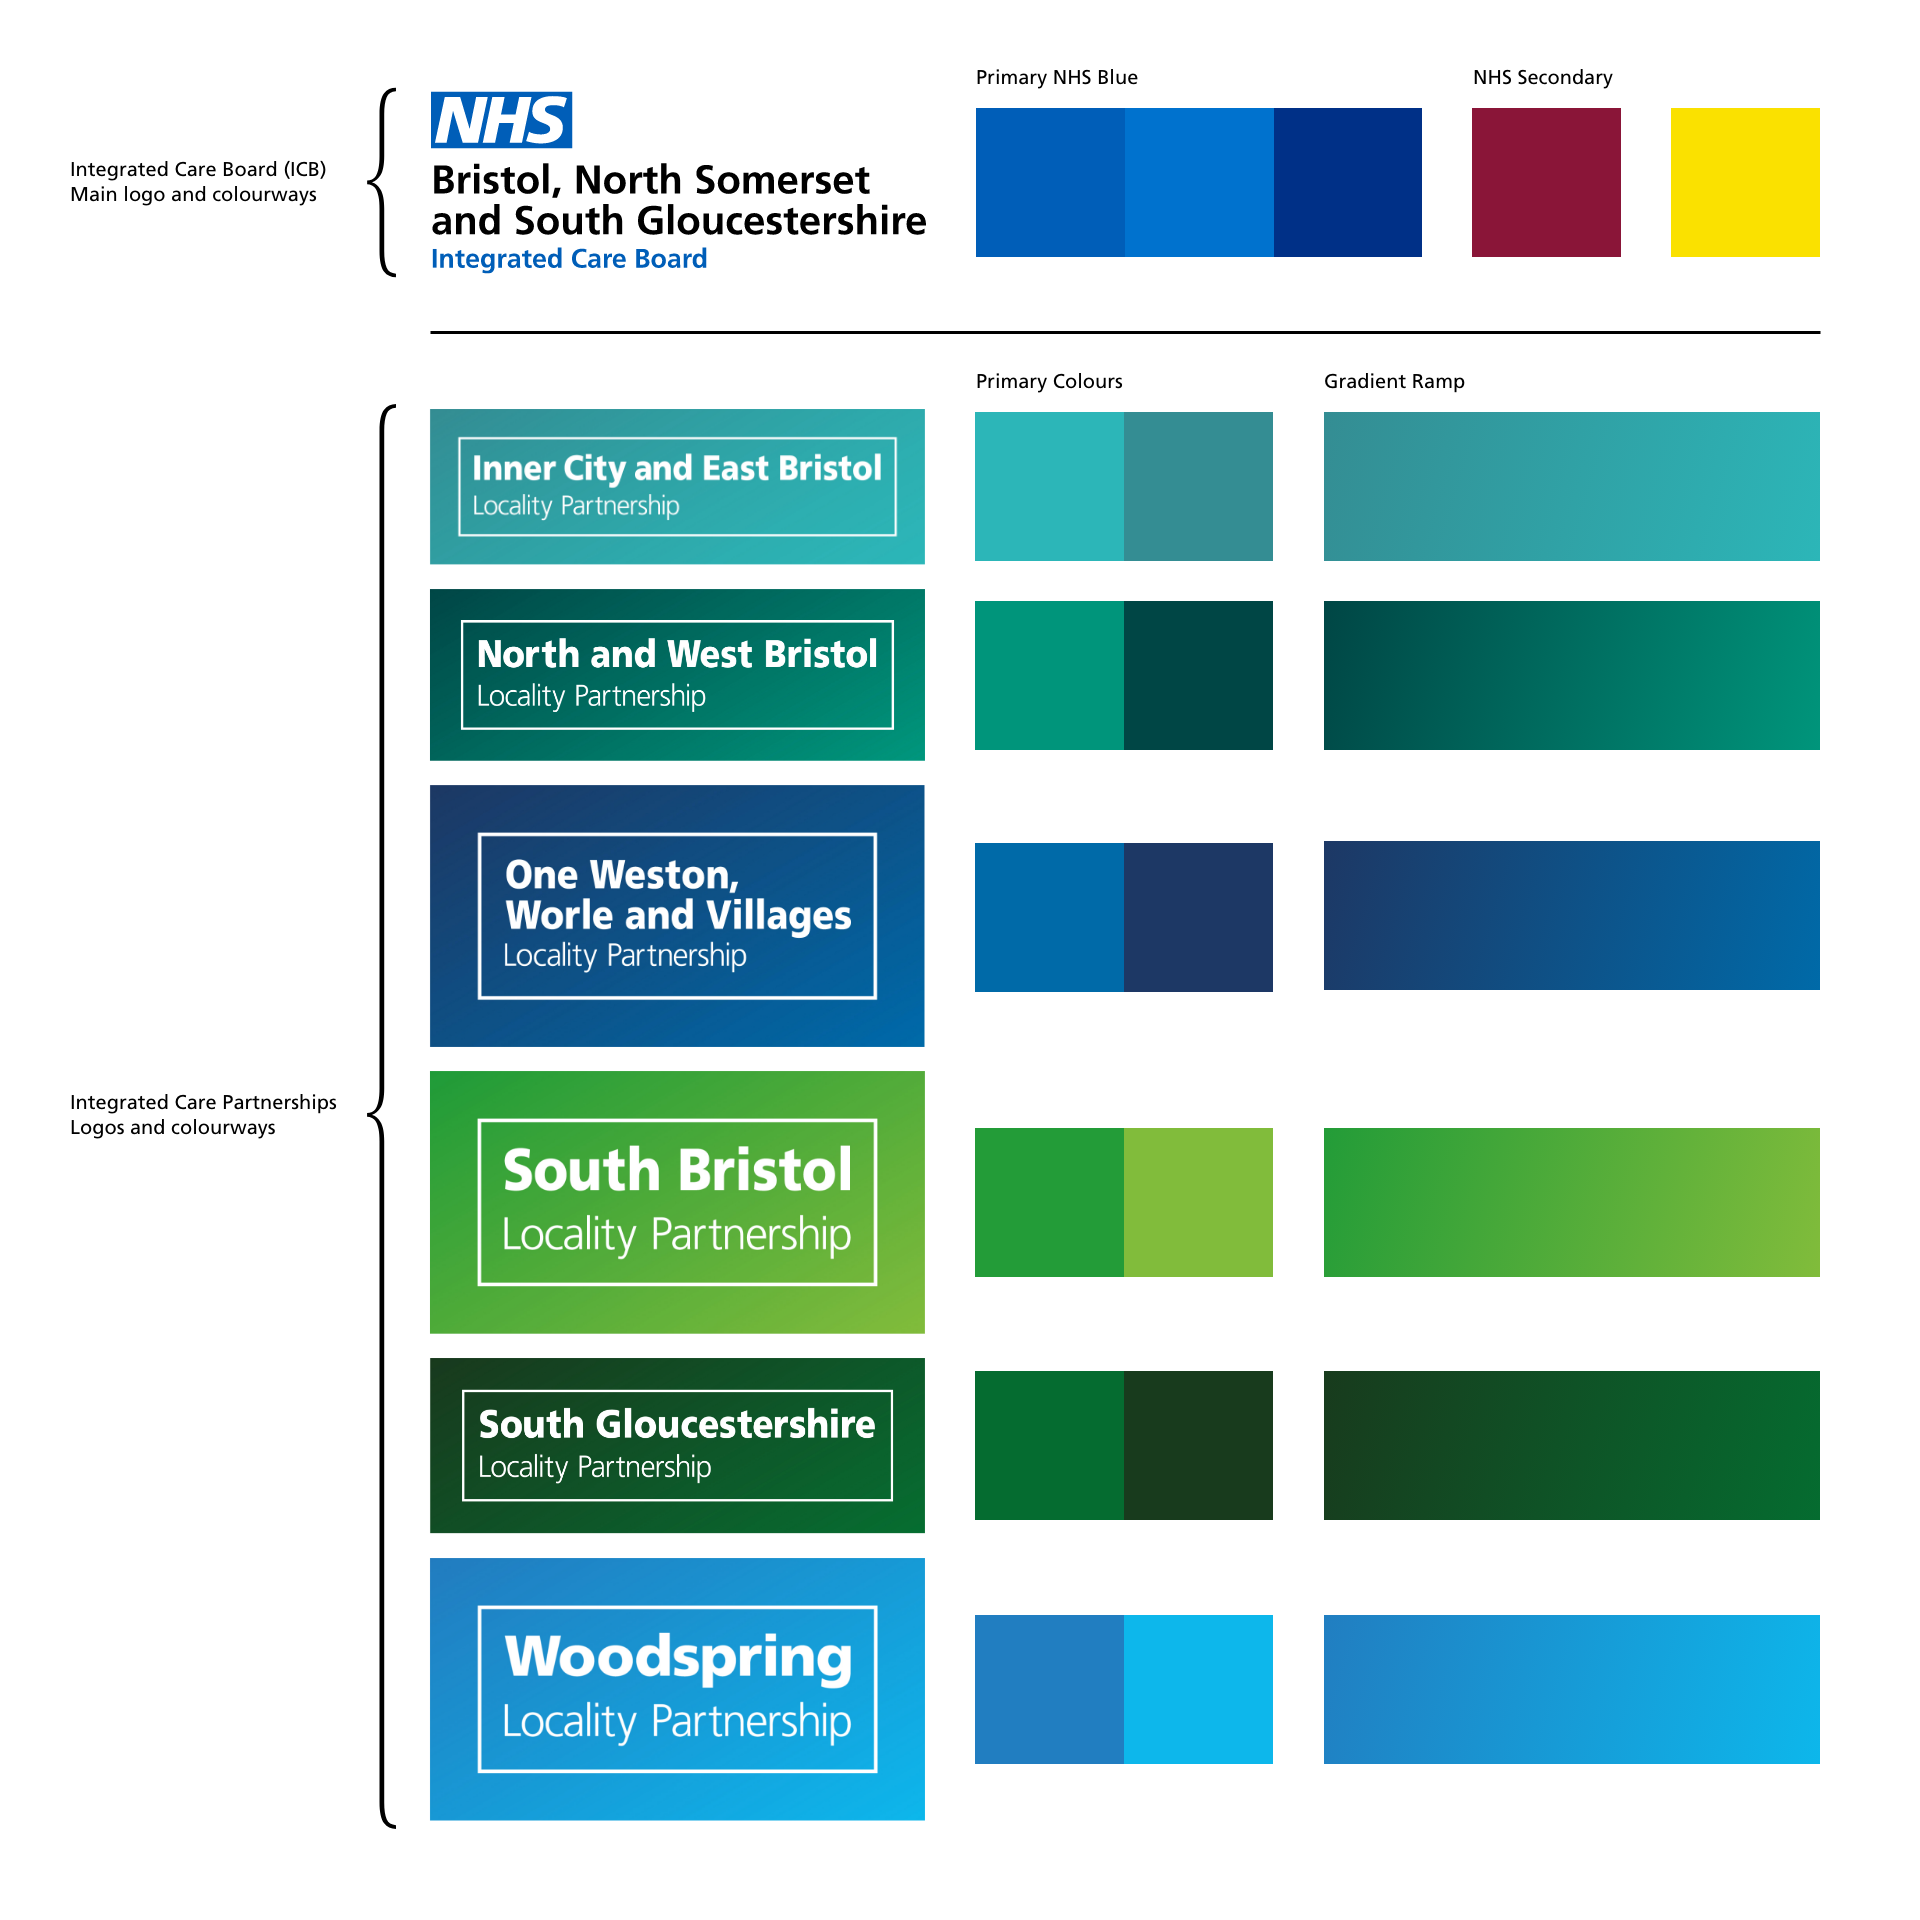 An image to show the logos and colourways of the Integrated Care Board and its Partnerships.